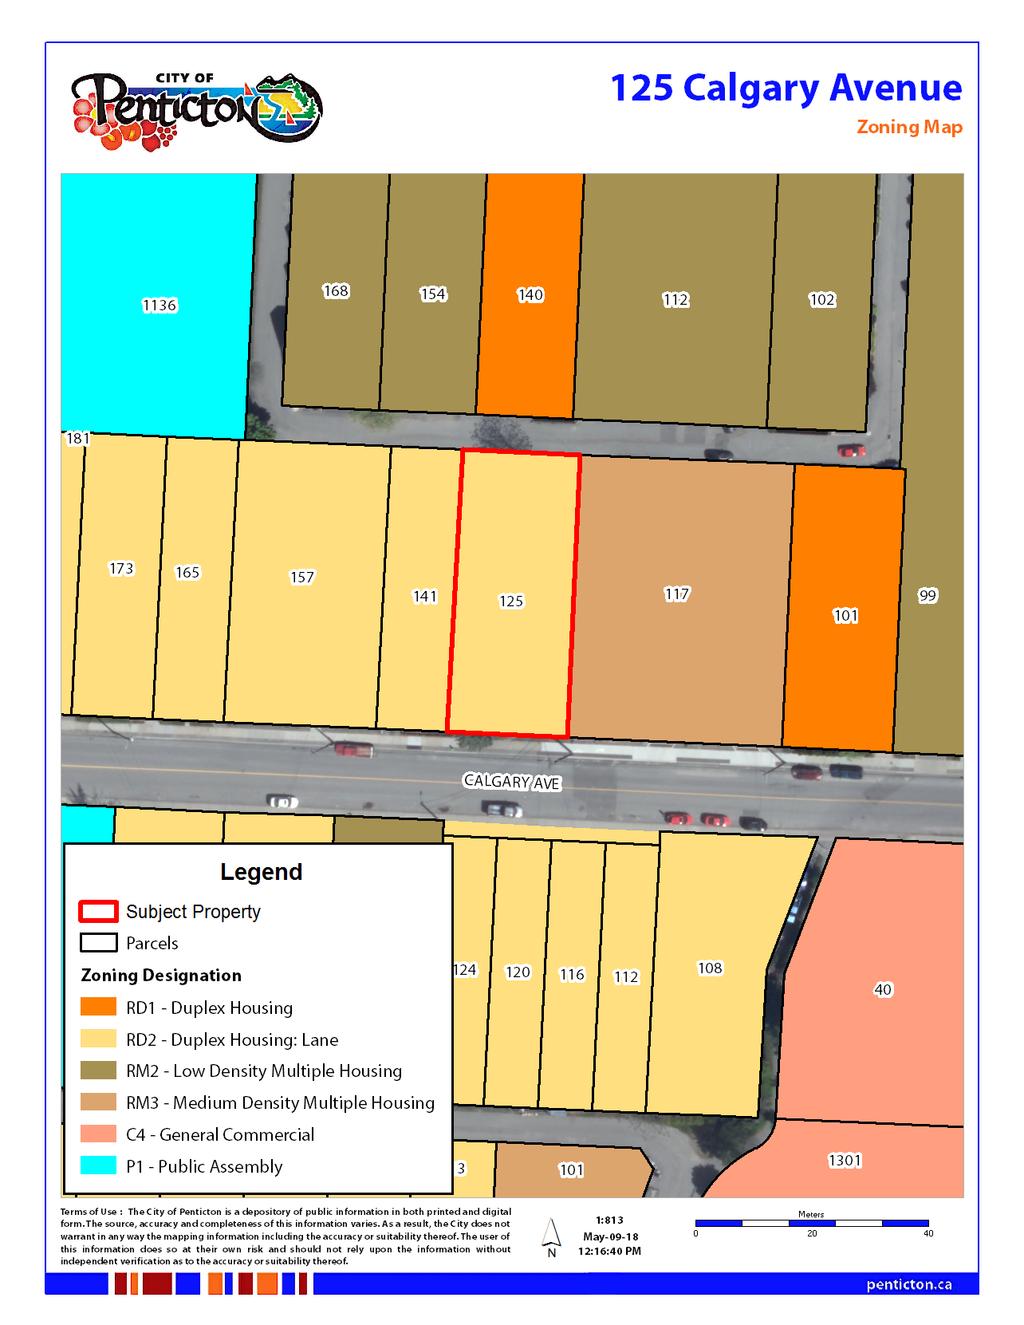 Attachment B Zoning Map Figure 2: Zoning Map